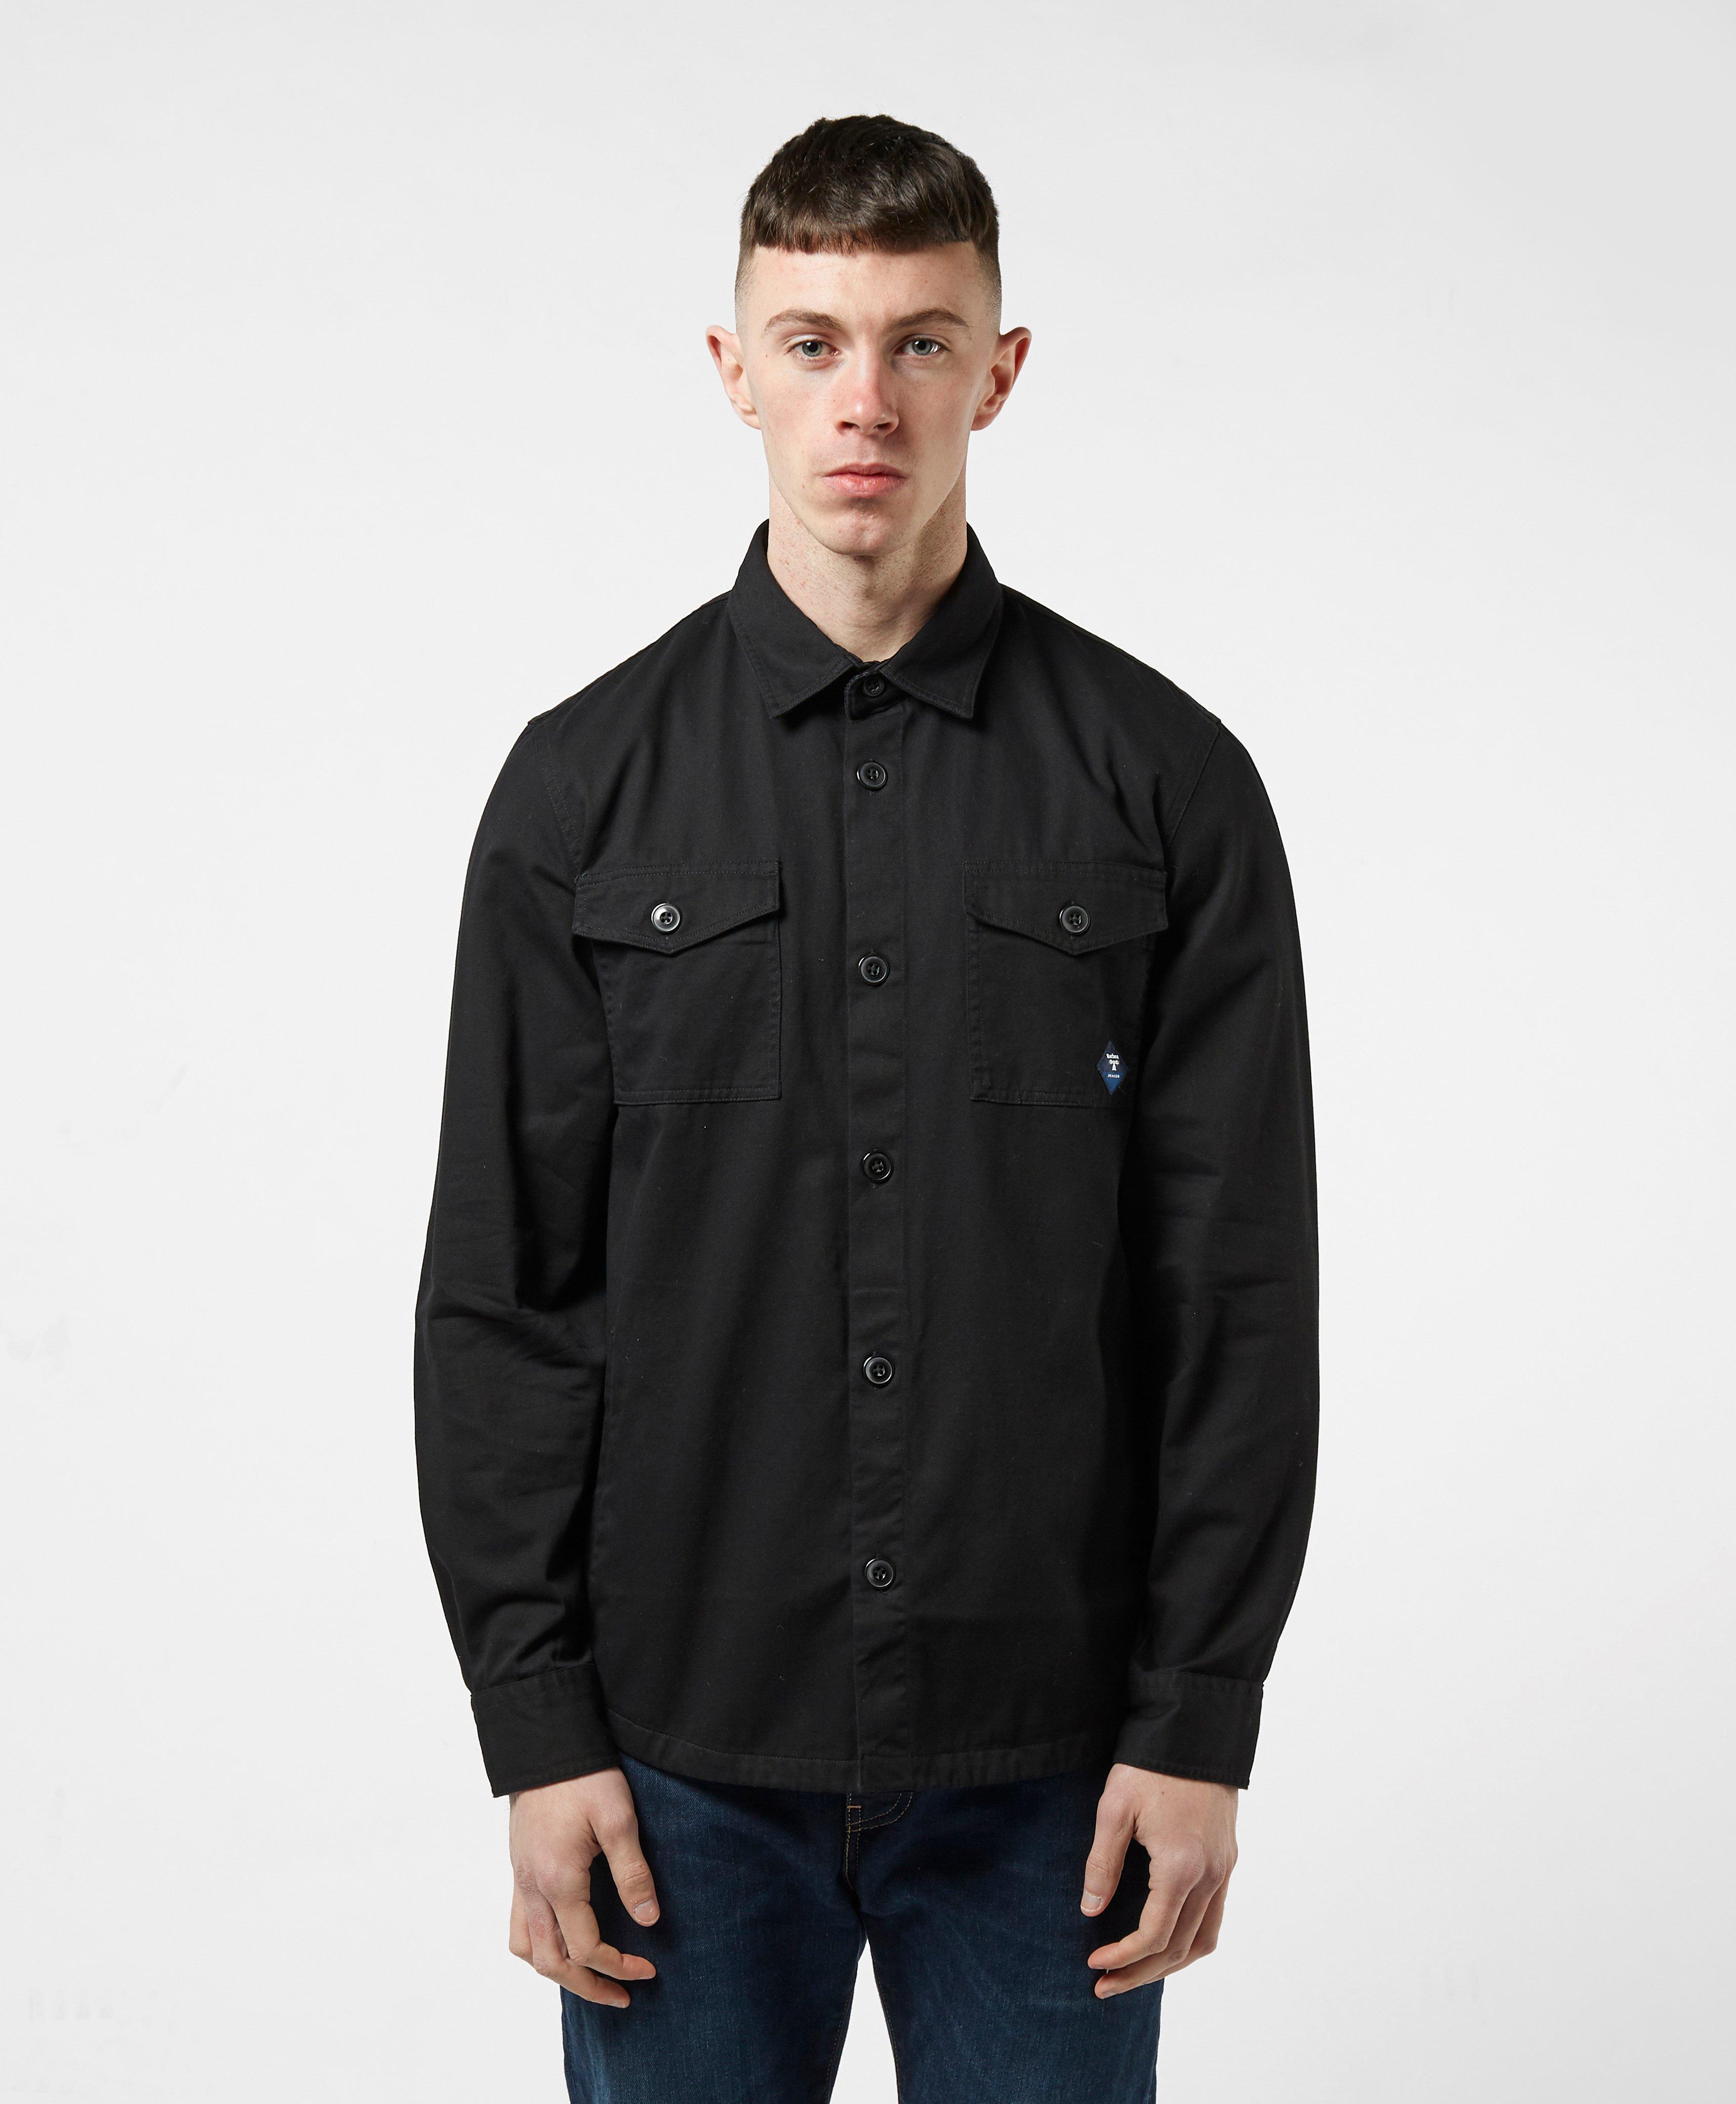 Barbour Twill Overshirt in Black for Men - Lyst